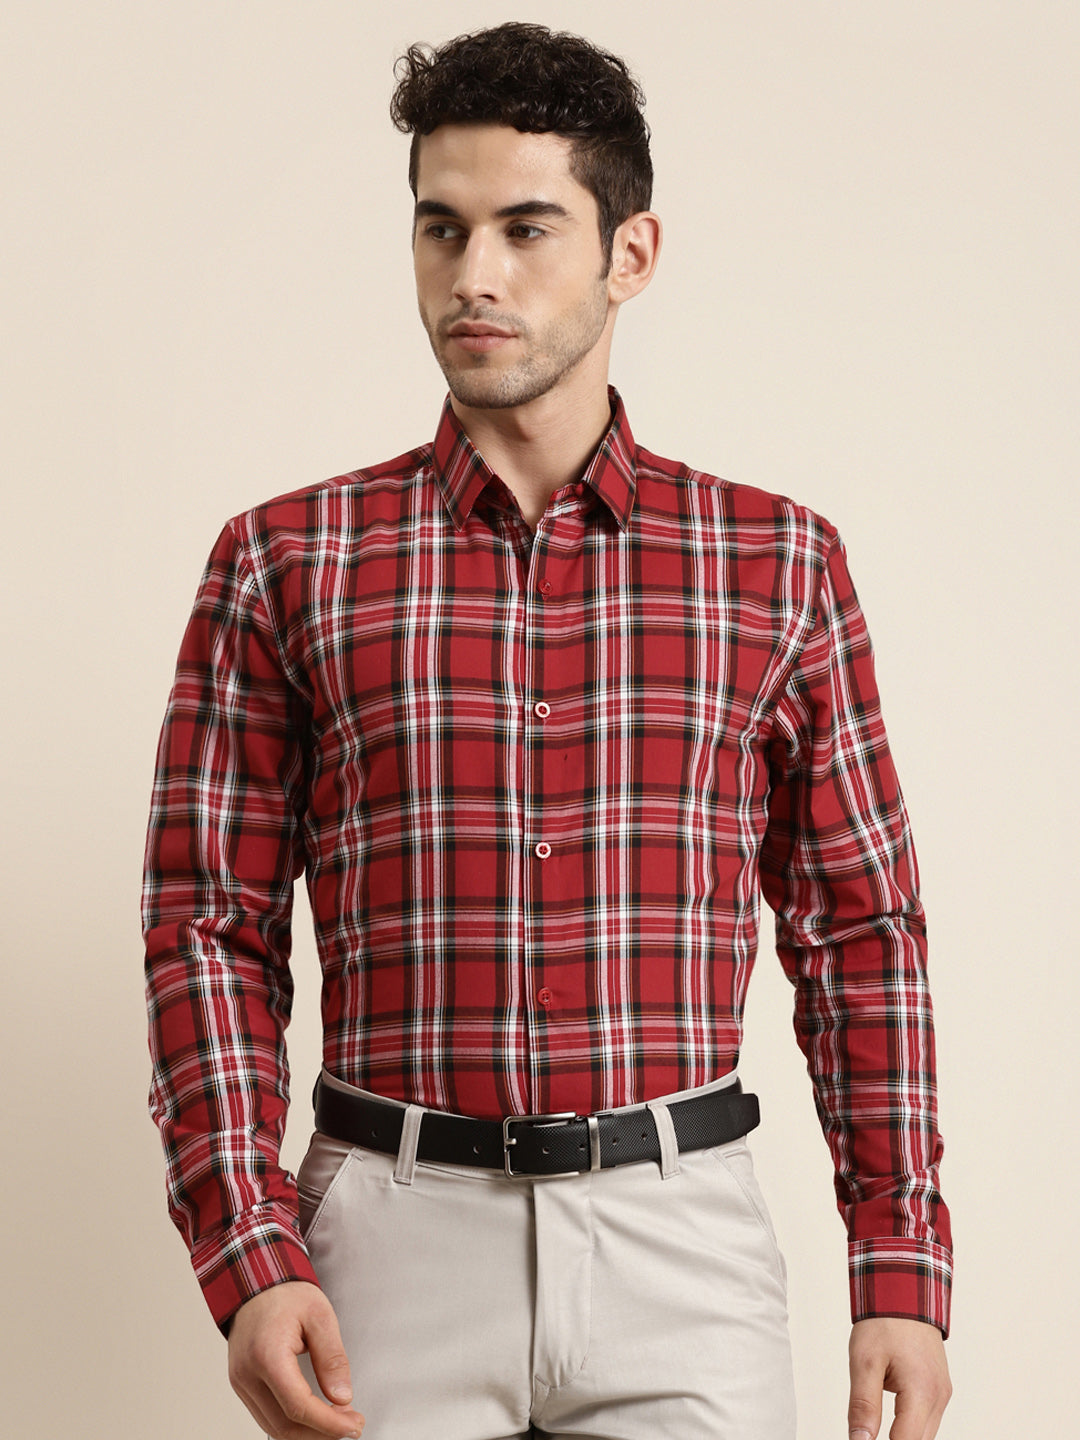 Men's Cotton Red & White & Casual Shirt